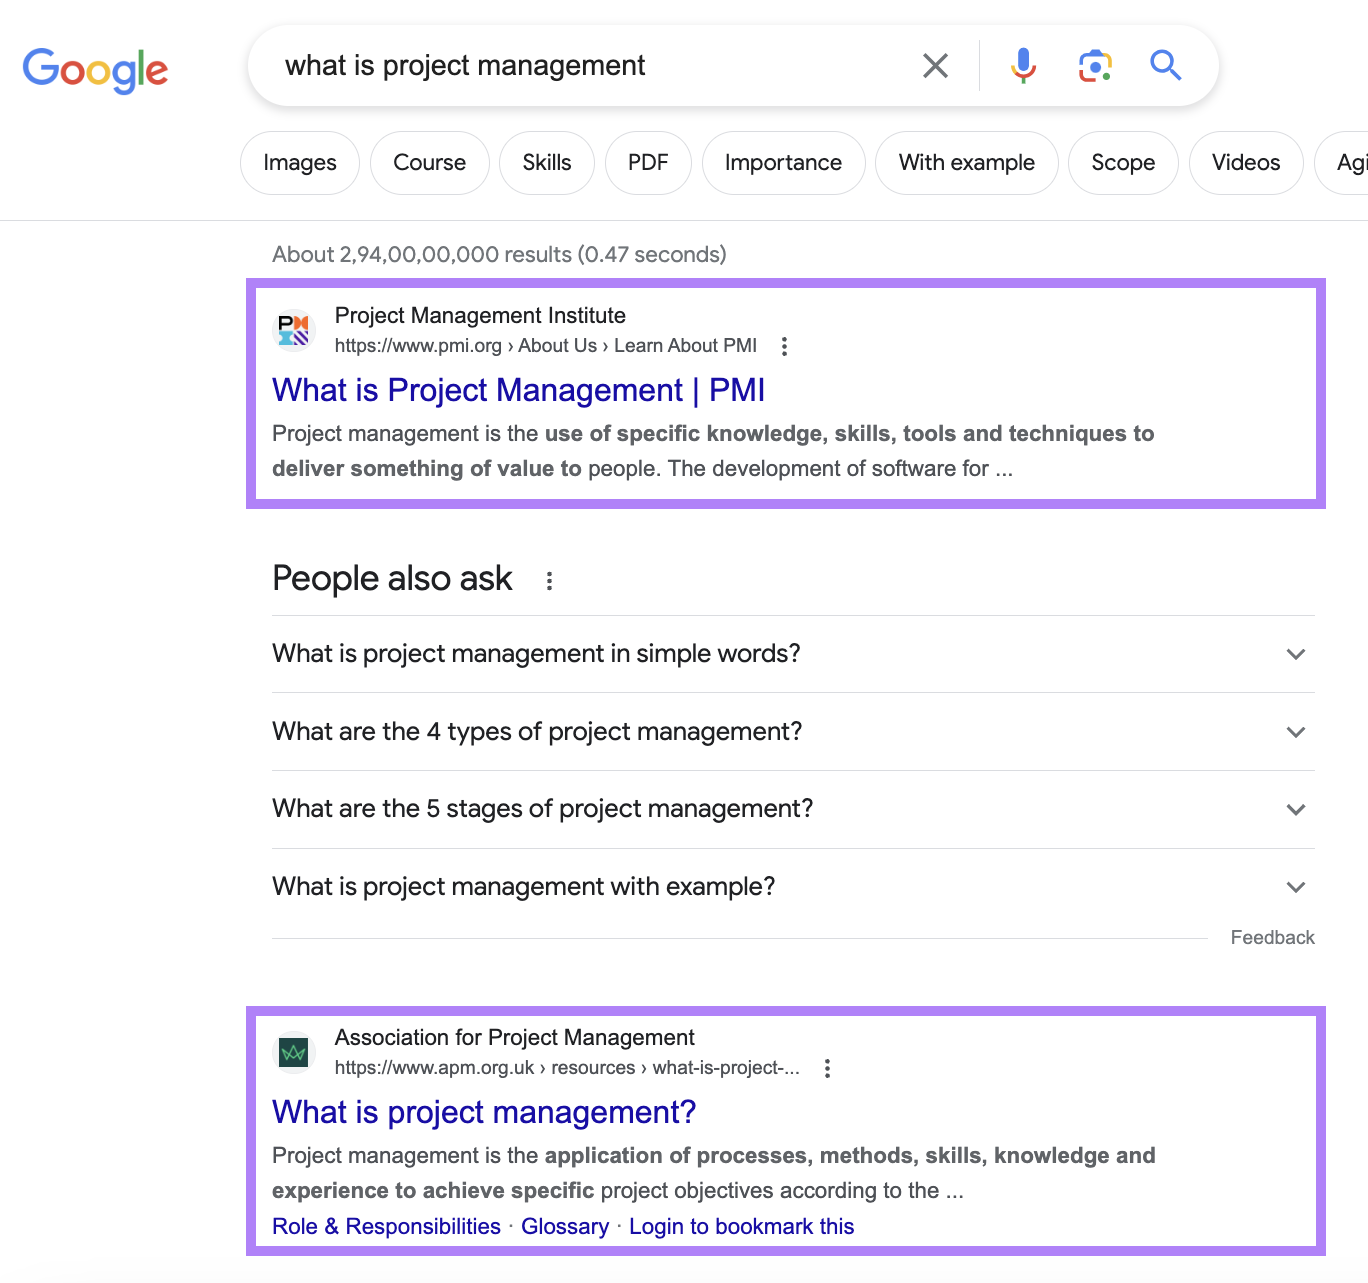 Google organic search results for "what is project management" query